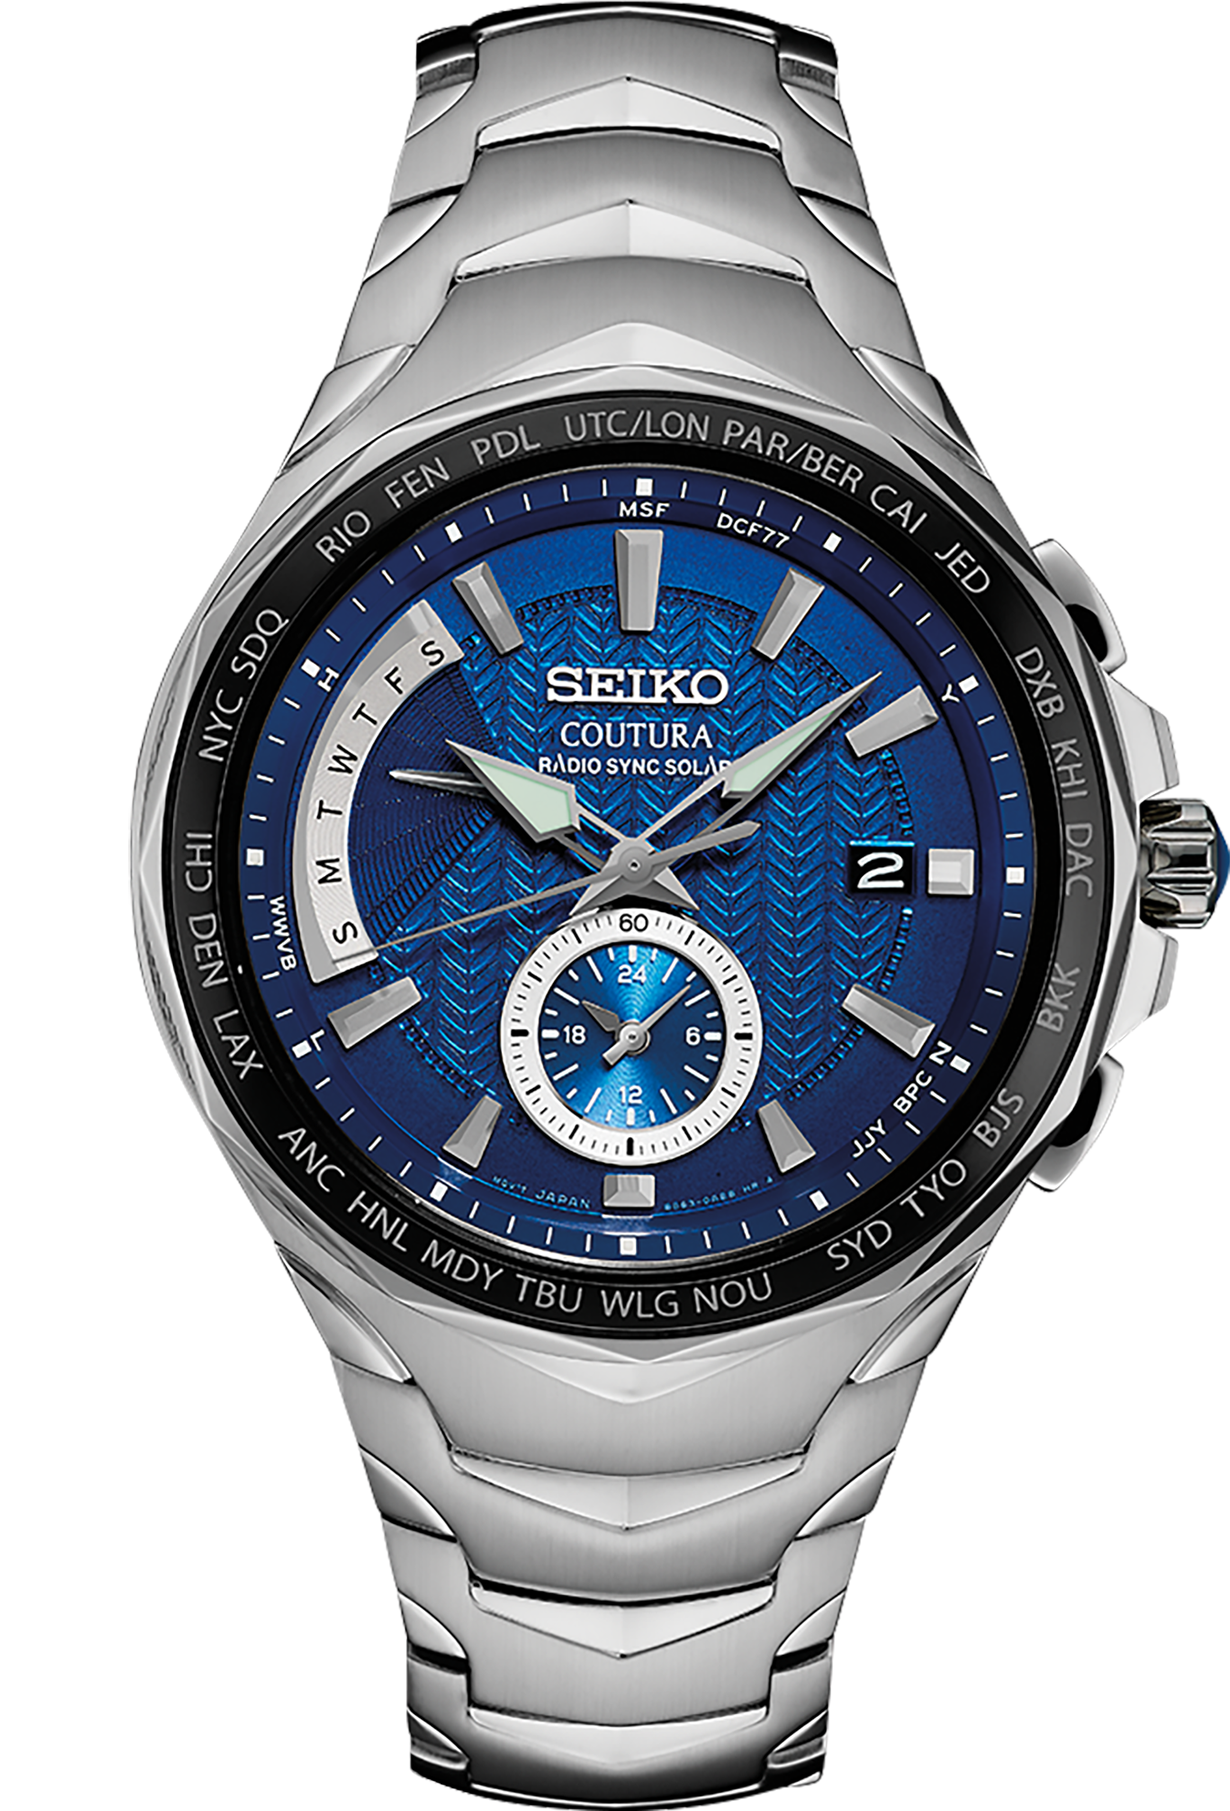 Page 3 - Seiko Coutura Price Guide | WatchCharts